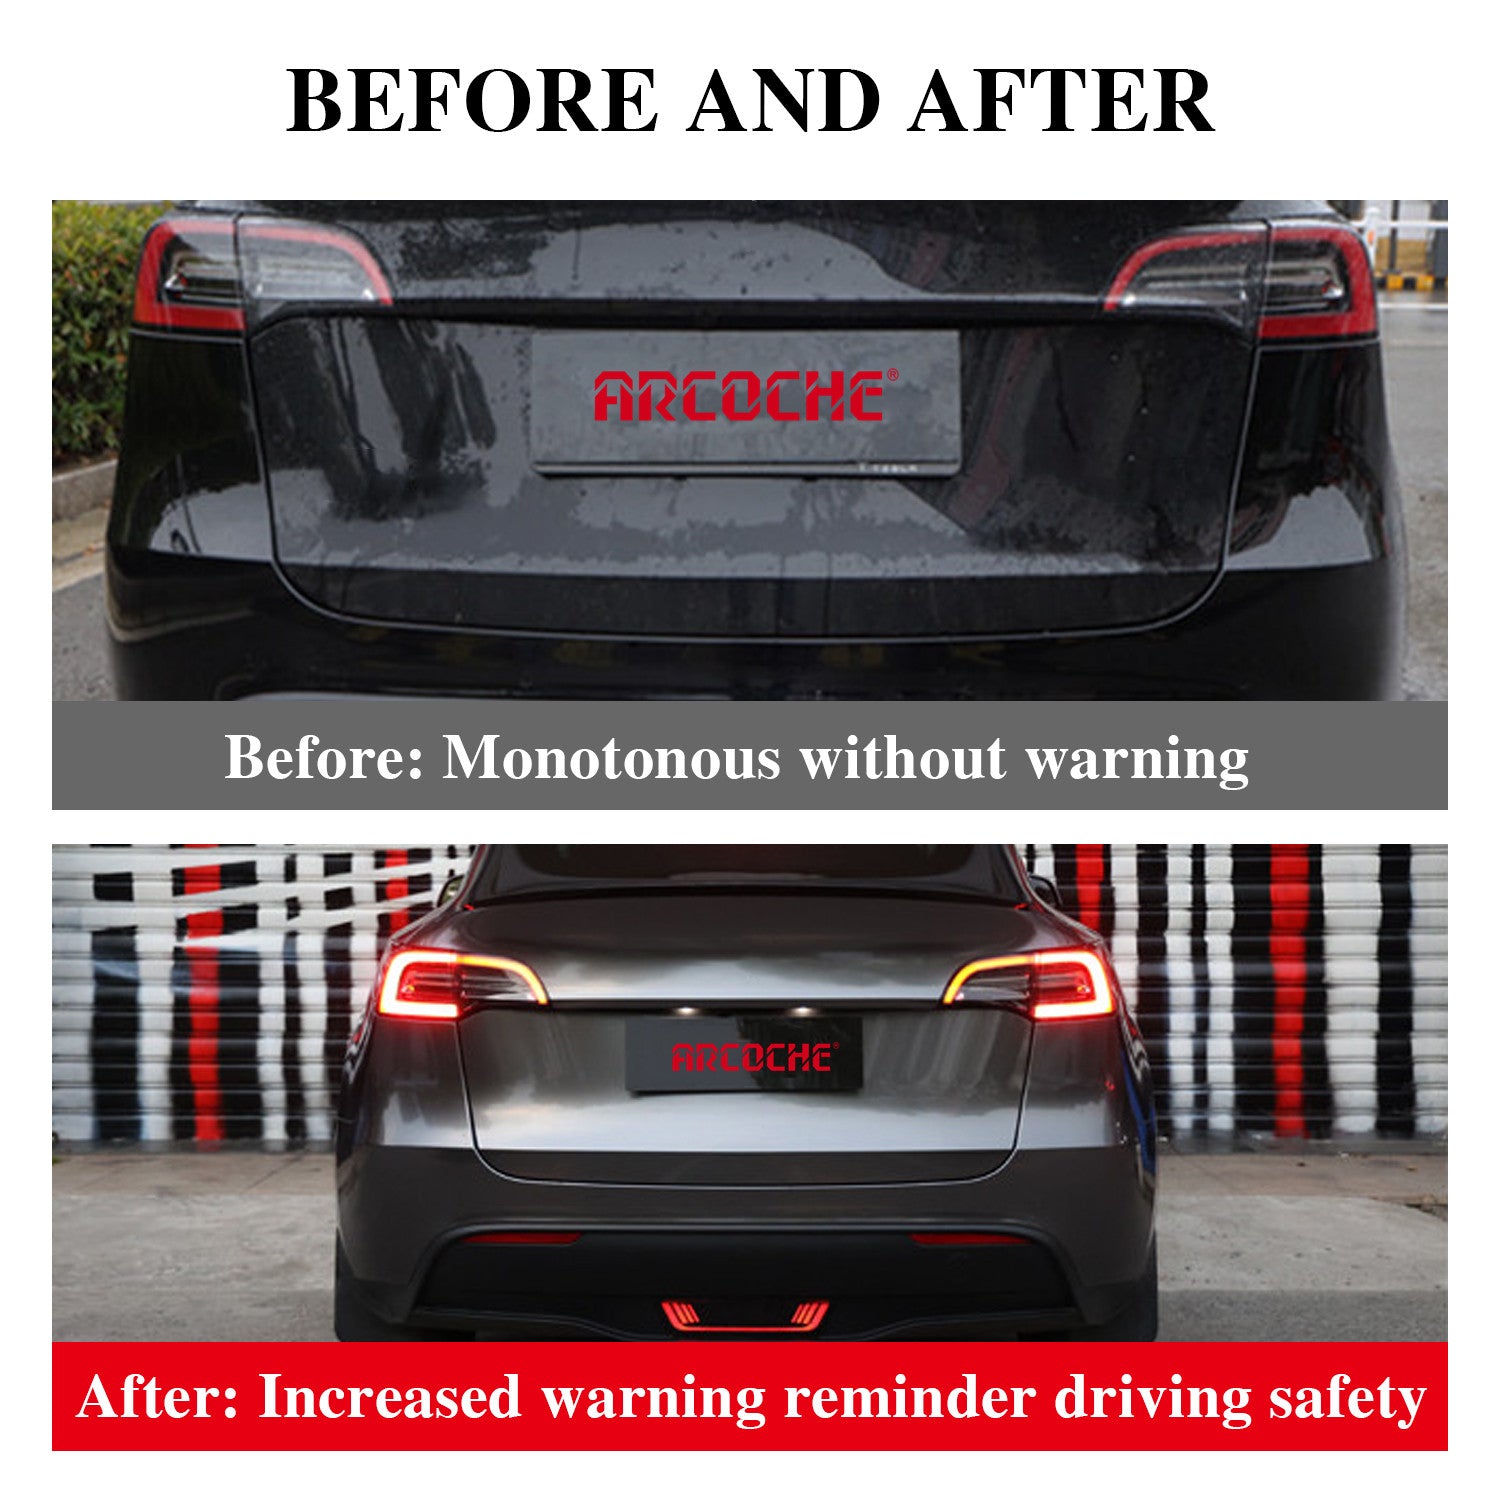 tesla model Y 2022 2023 2021 2020 2019 s3y arcoche accessories Rear Brake Pilot Light Tail LED ABS plastic With anti-rear collision warining flash and turning light he Car Pilot Light LED Warning Stop Lamp Safety Lamp Exterior Accessories tailoring exclusive auto parts